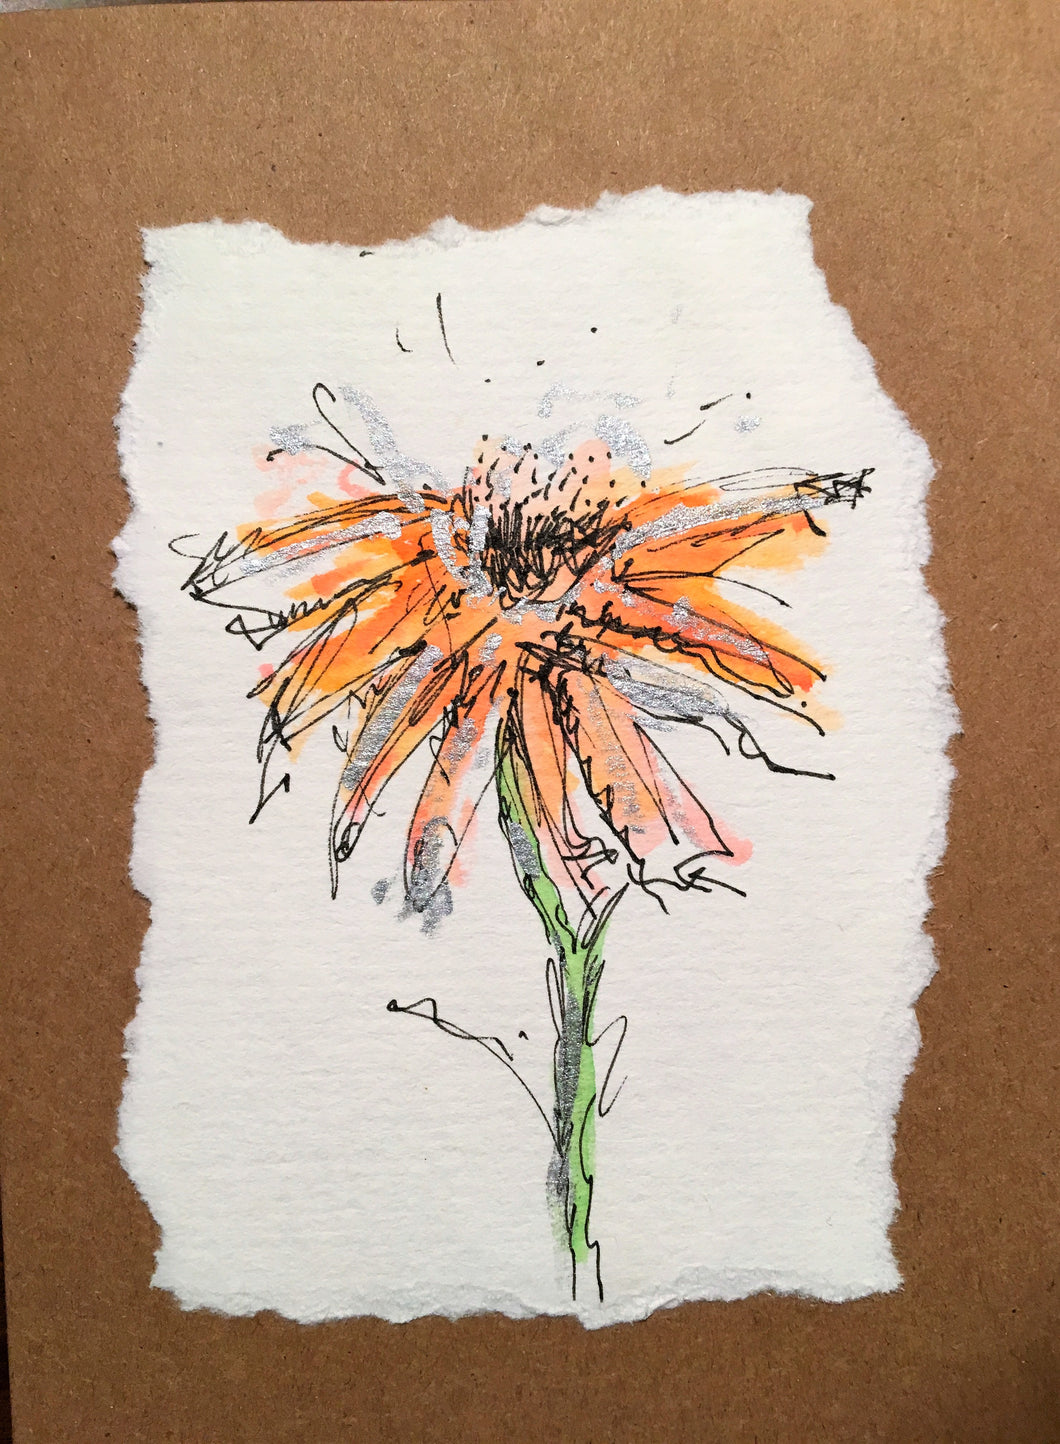 Handpainted Watercolour Greeting Card - Orange Abstract Flower with Silver Design - eDgE dEsiGn London